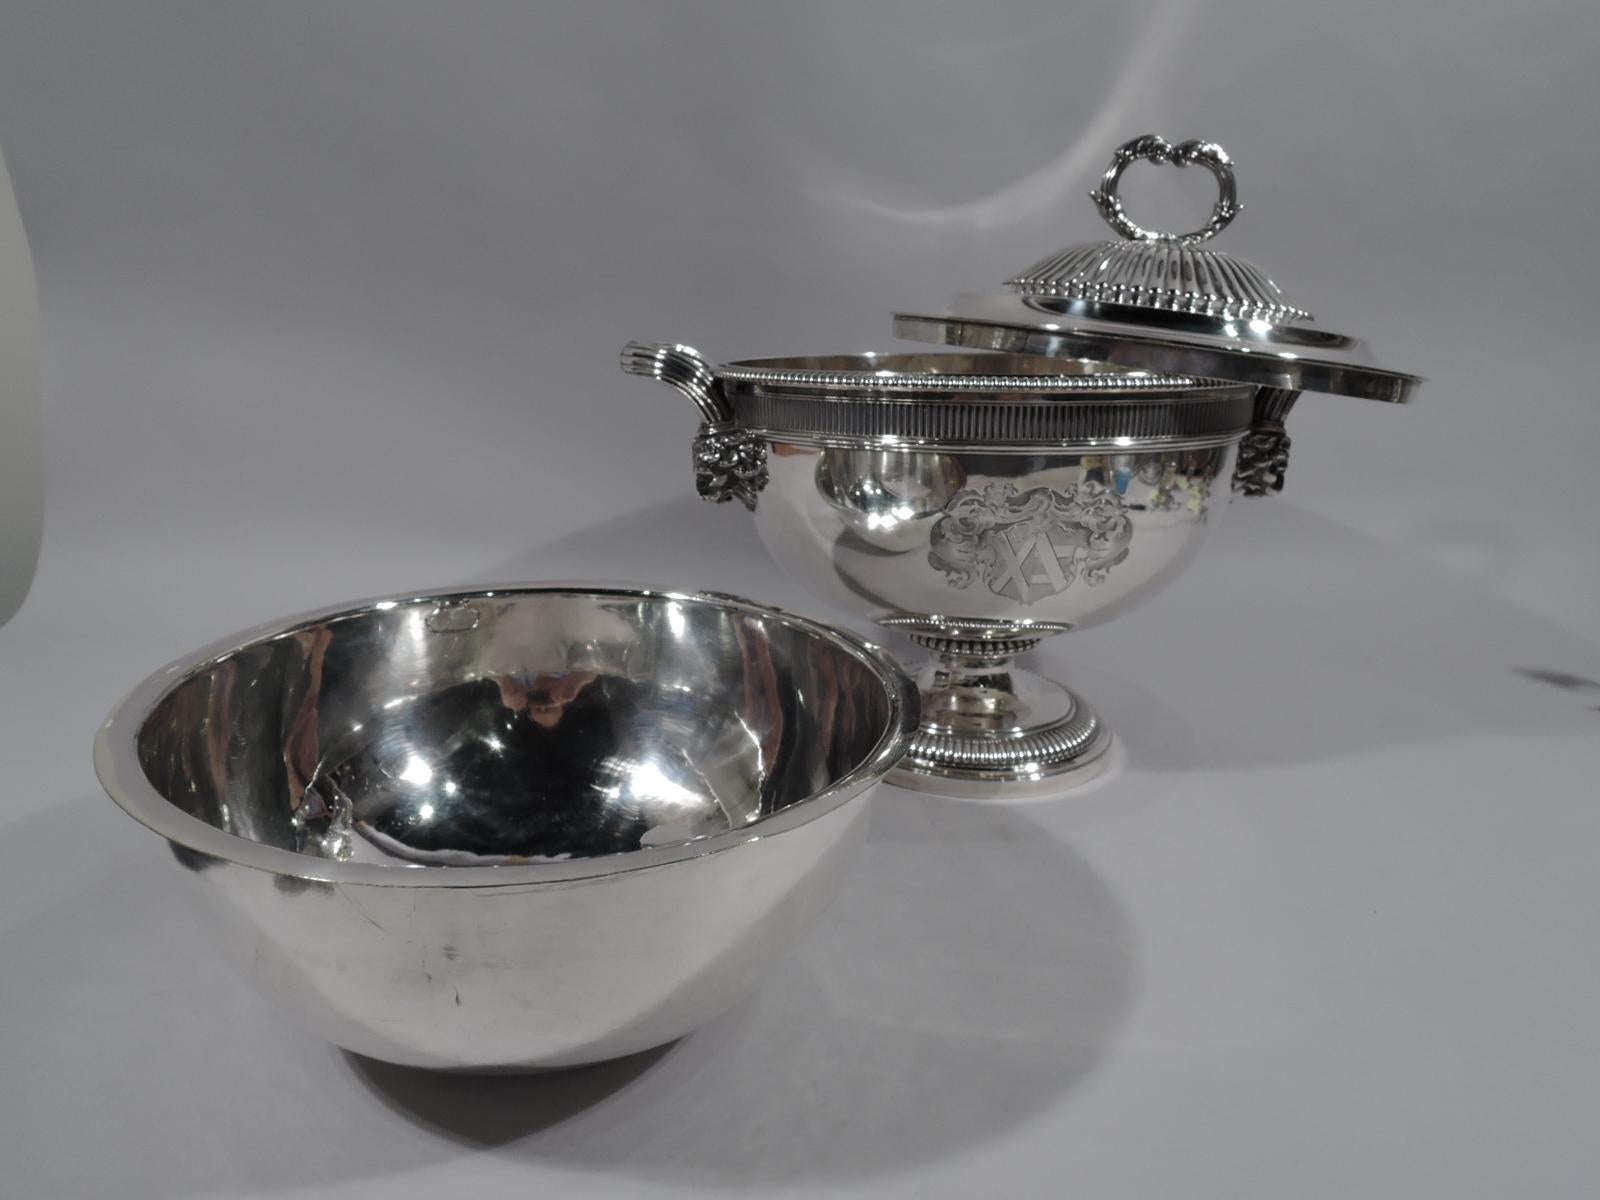 Early 19th Century Magnificent English Regency Sterling Silver Soup Tureen by Paul Storr